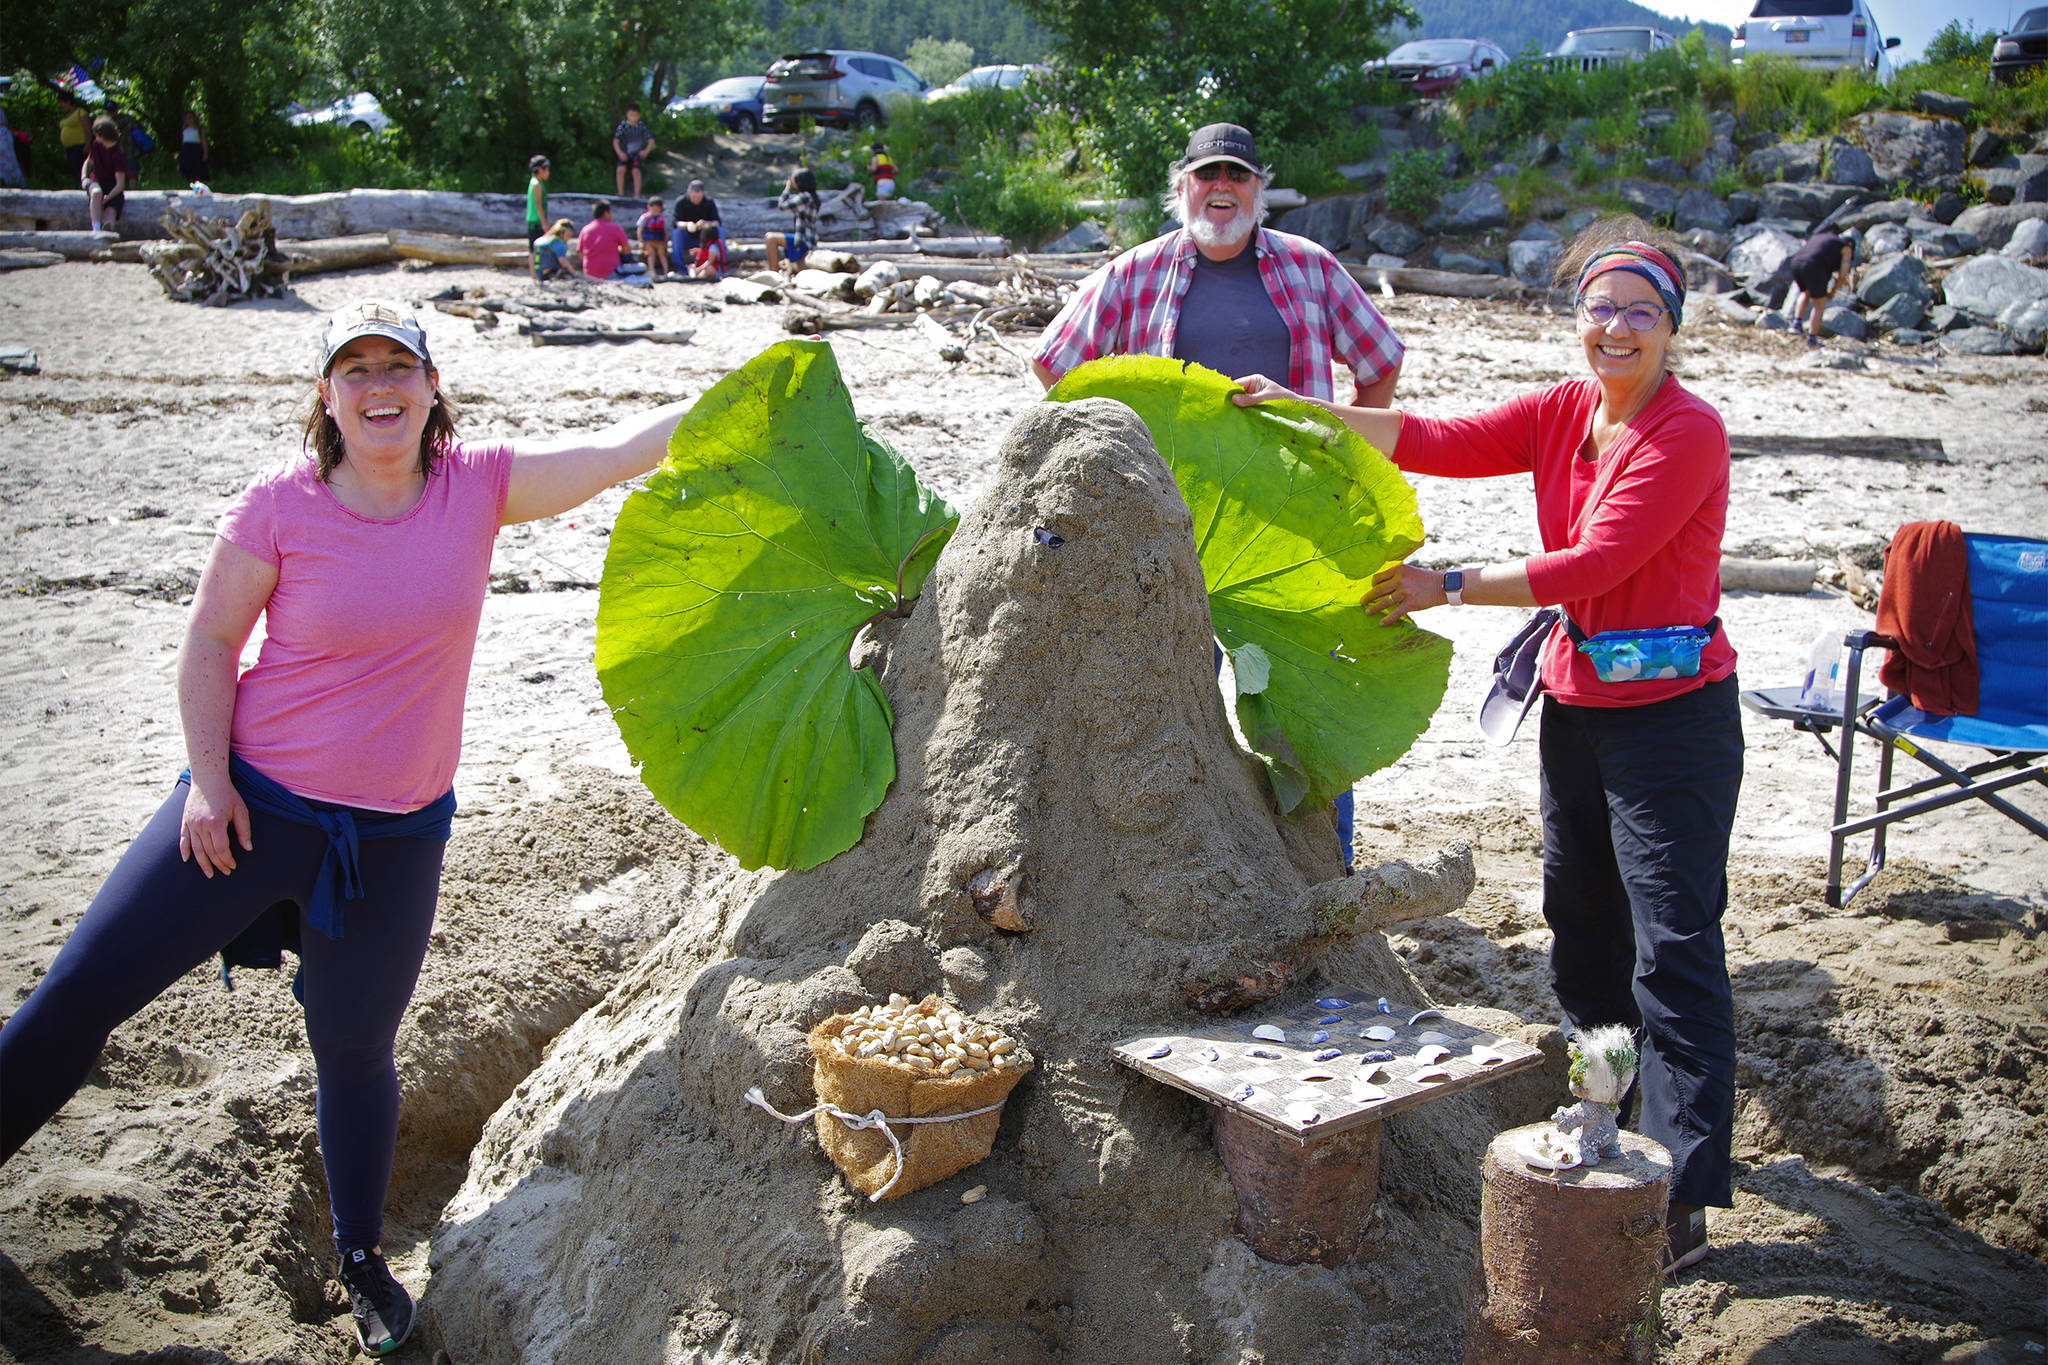 Team Waldon Trolls shows off their sandcastle, “Elephant Playing Checkers with a Troll,” which was awarded first place in the sandcastle competition sponsored by the Douglas Fourth of July committee on July 4, 2021. (Courtesy photo/Zane Jones)